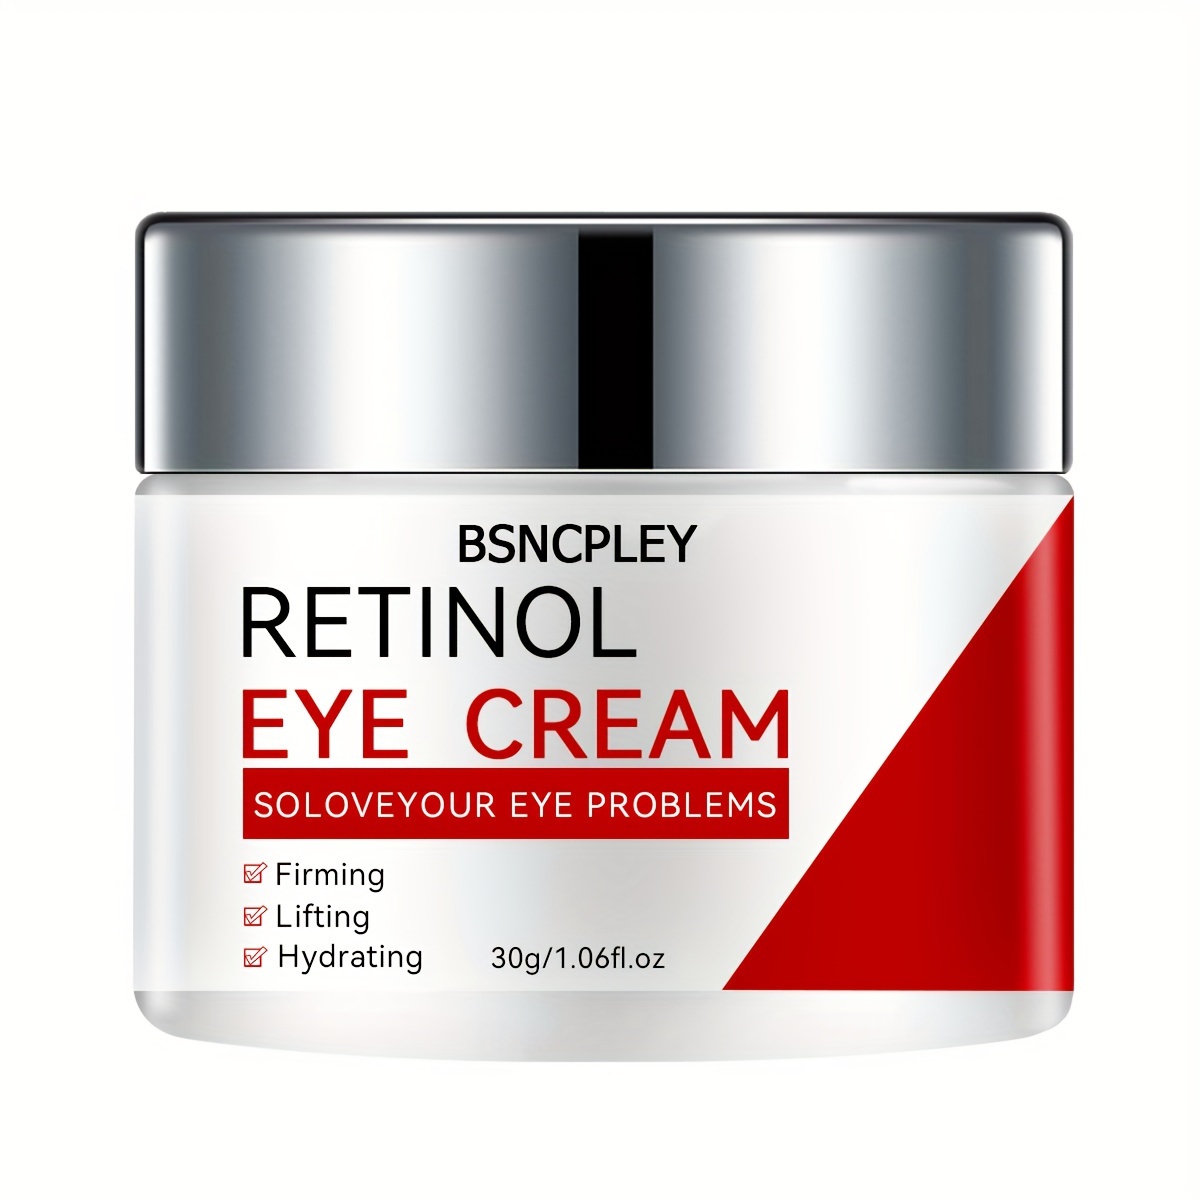 

30g Retinol Eye Cream, Eye Cream Containing Hyaluronic Acid And Collagen, Firm, Smooth And Moisturize The Eyes Area With Plant Squalane